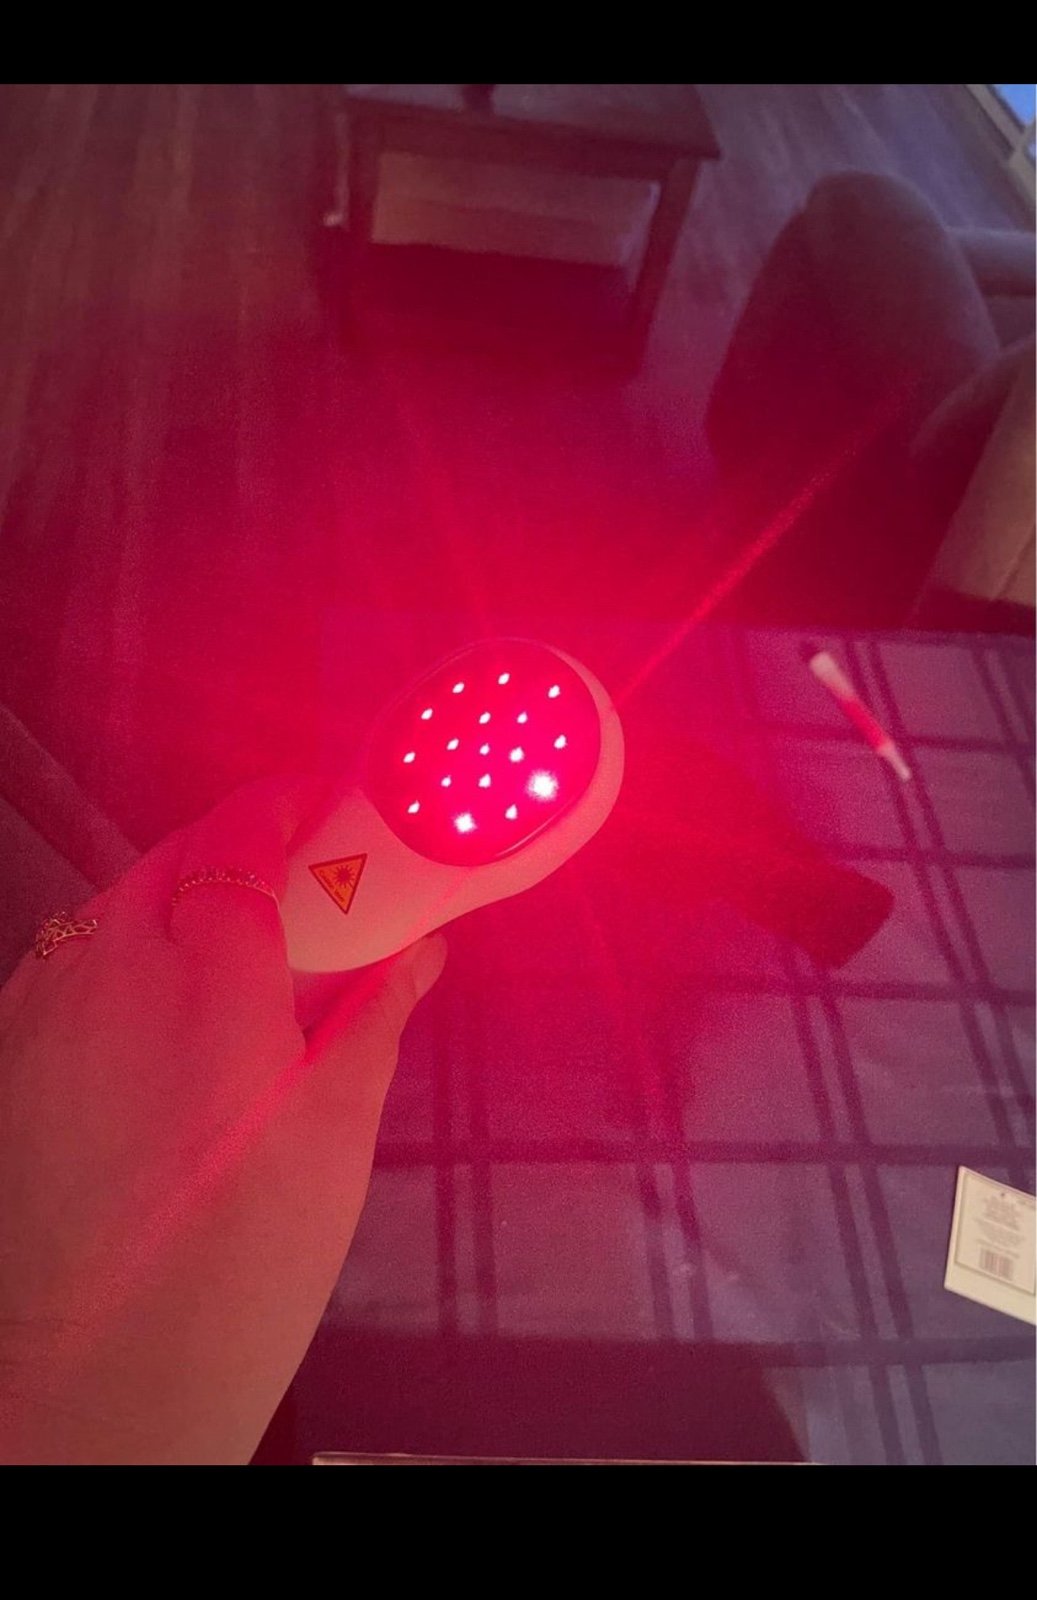 Red light therapy wand fUtZSK3D8